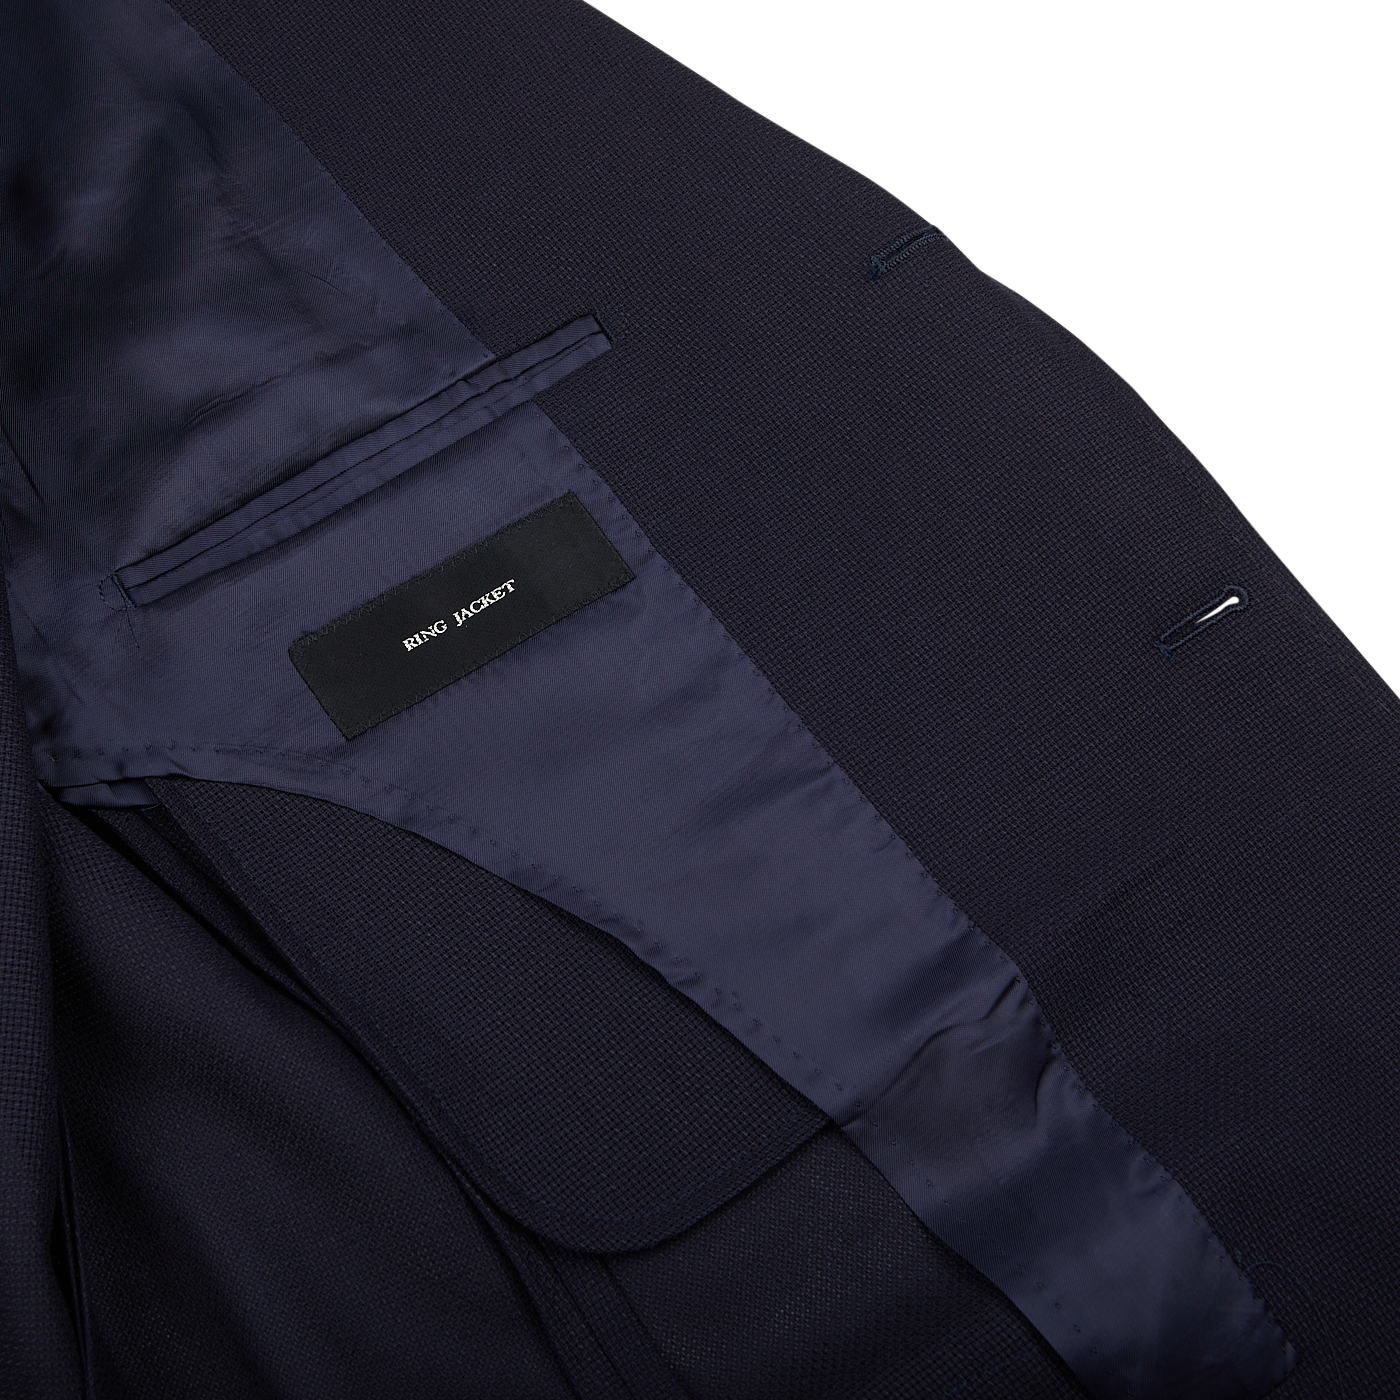 Close-up of a Navy Blue Wool Balloon Travel Blazer with a "Ring Jacket" brand label visible inside.